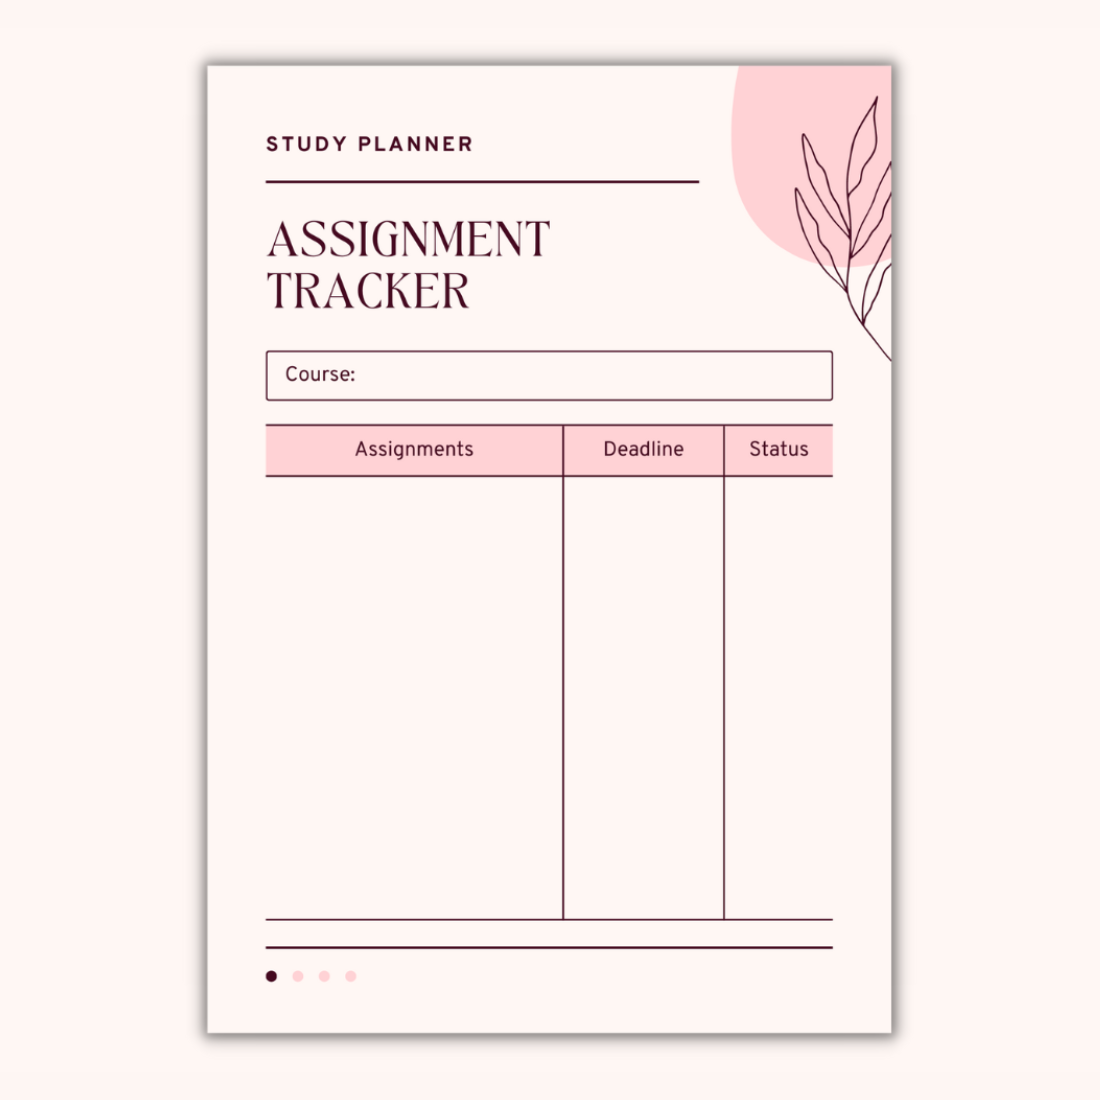 Study Planner Assignment Tracker Template preview image.